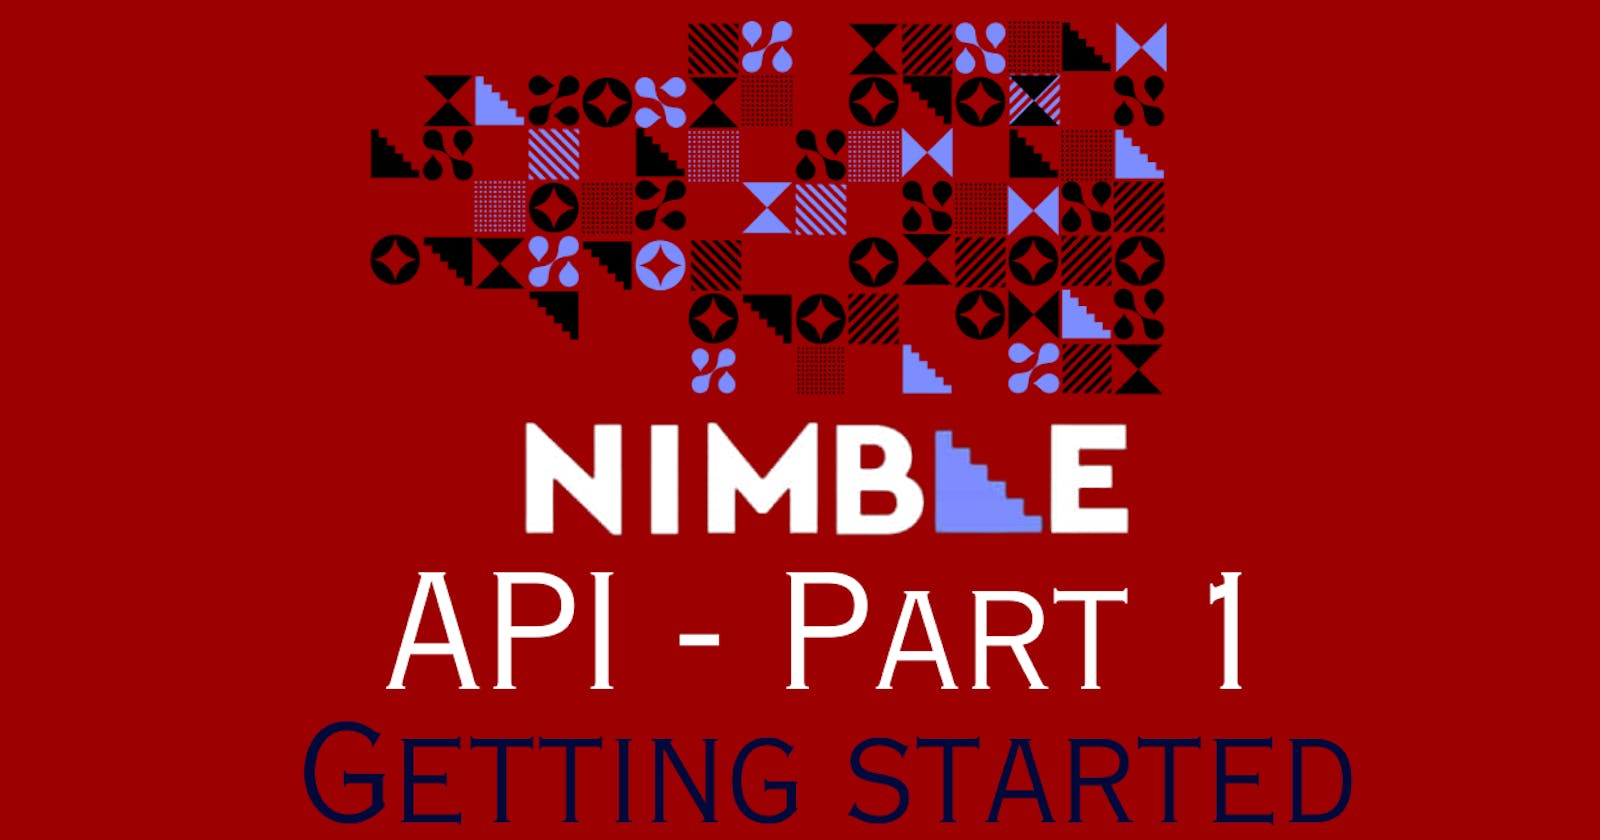 Nimble API: Generate Credentials and Start Web and Data Scraping